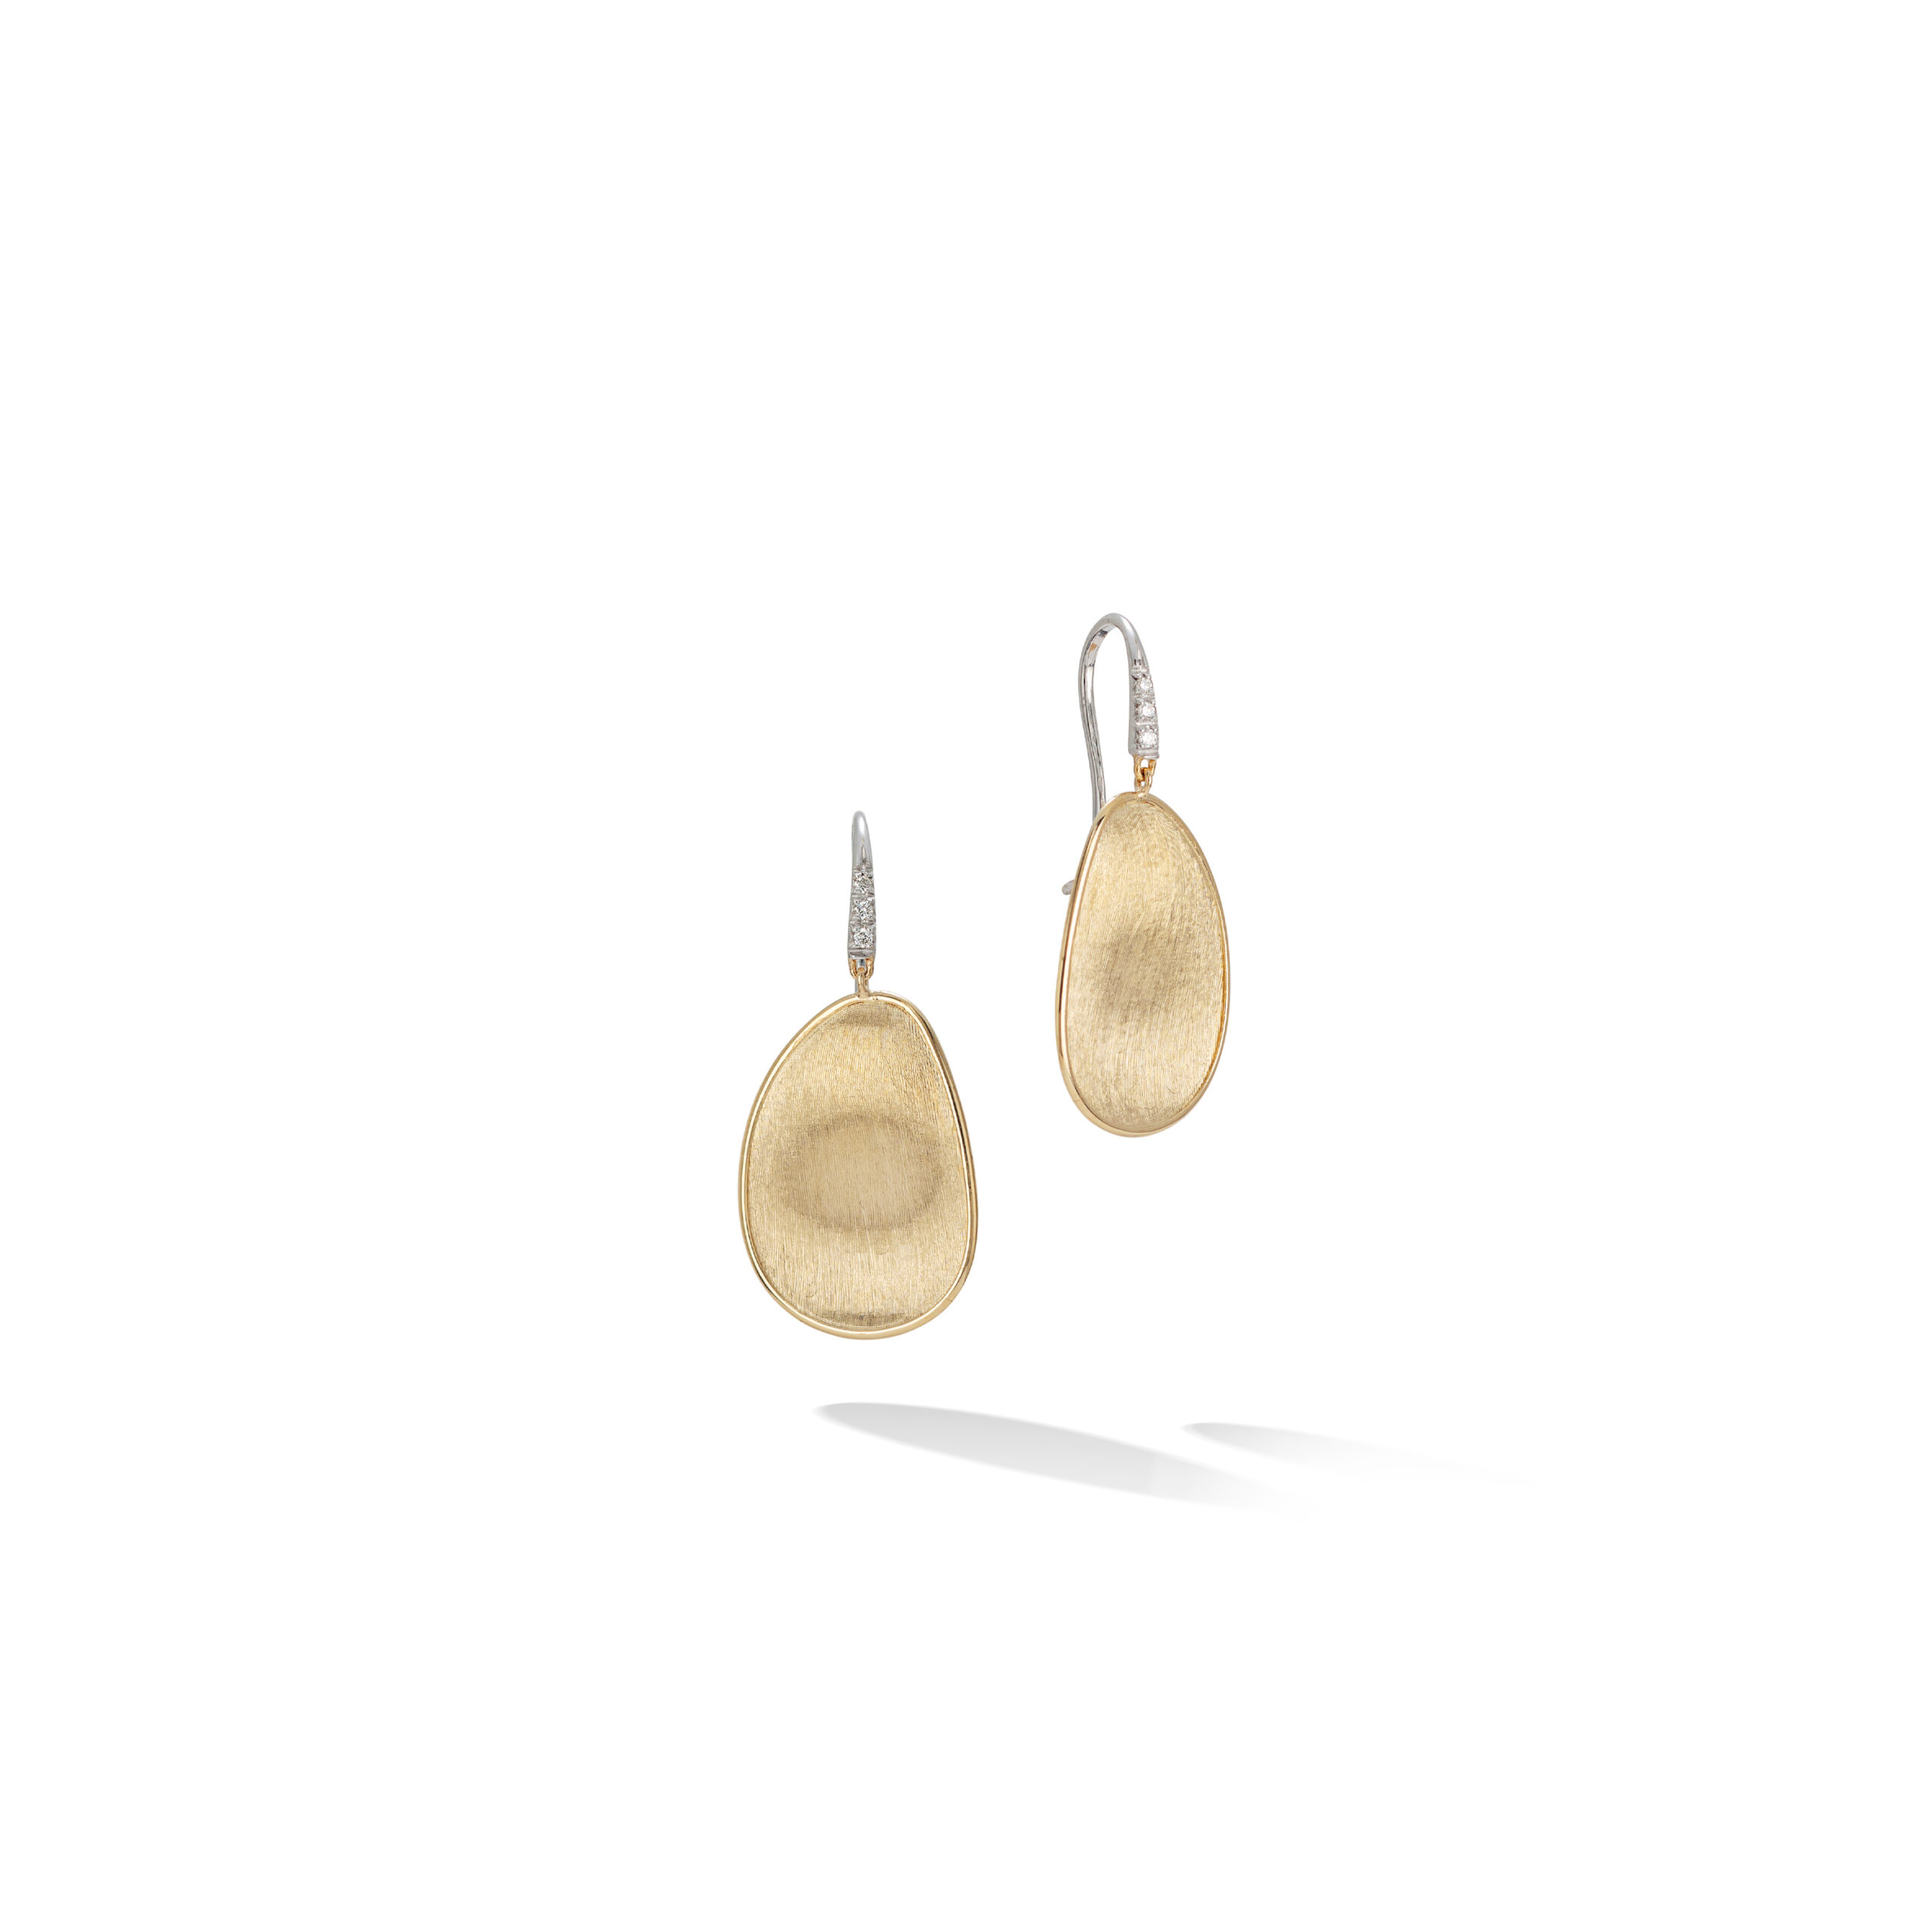 OB1343-A B1 YW Q6Marco Bicego Lunaria Collection 18k Yellow Gold and Diamond Medium Drop Earrings